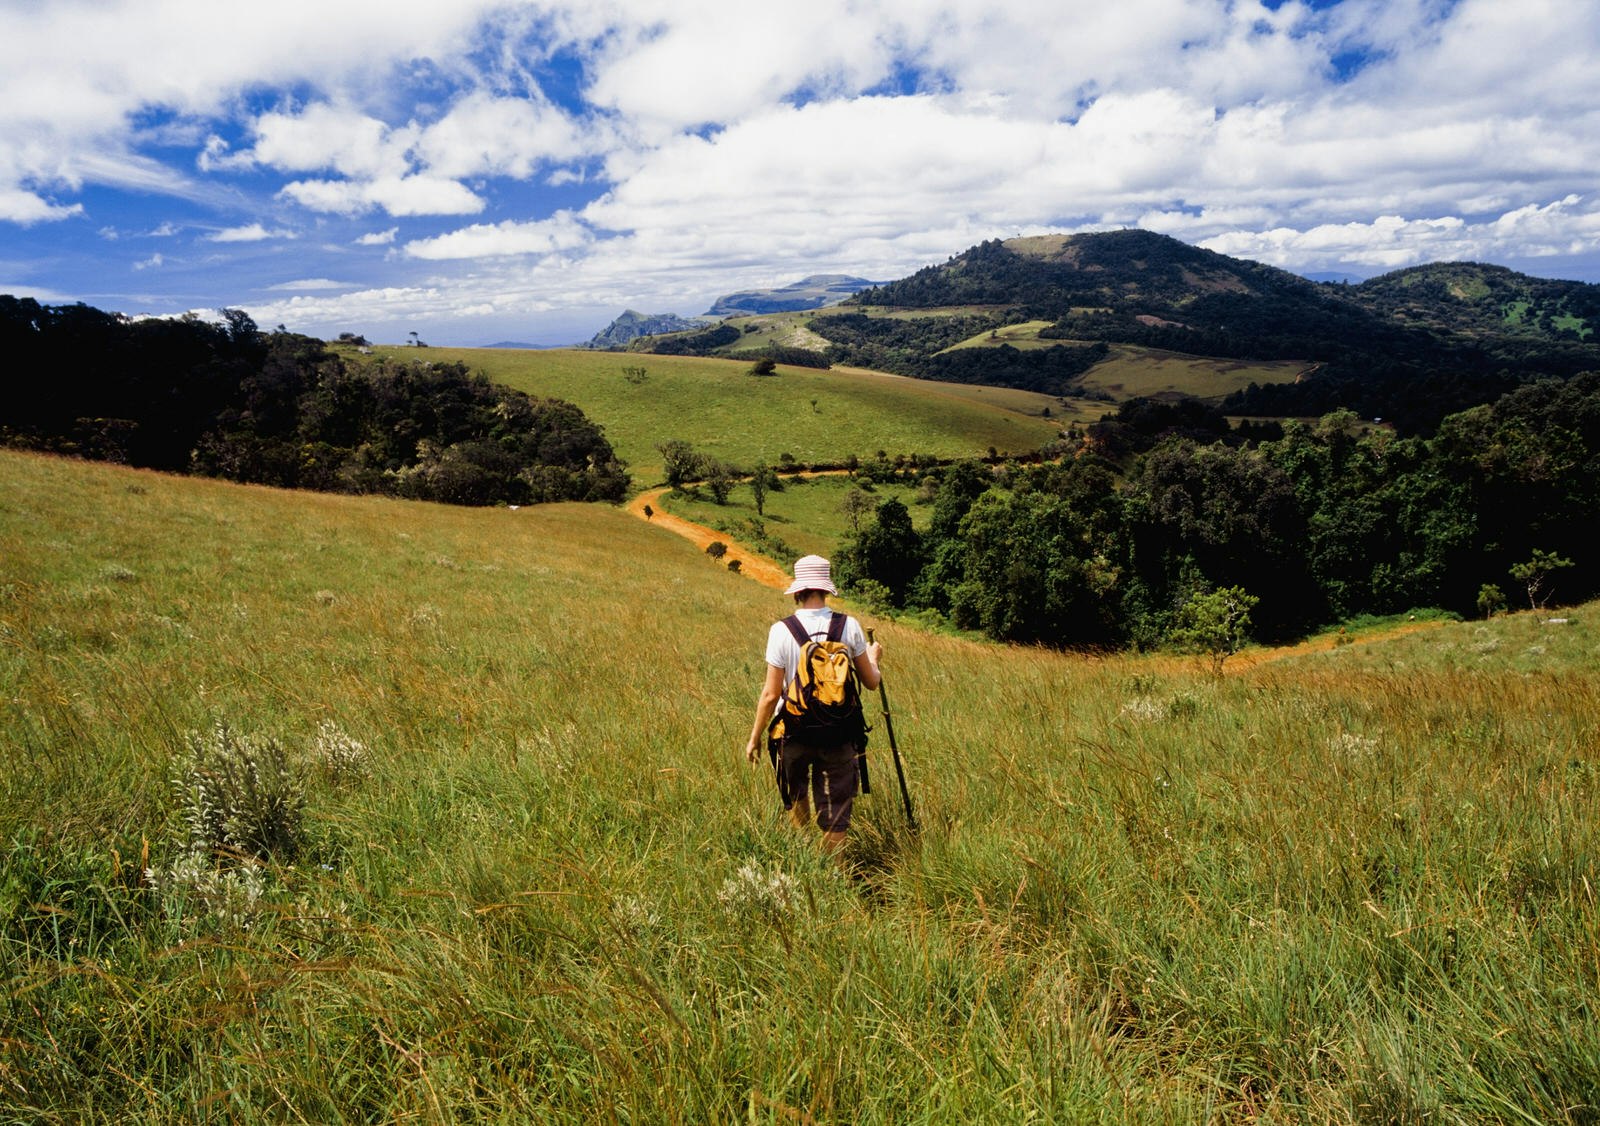 The image looks at the back of a hiker with a walking stick moving down a trail in deep grass; the trail leads towards two sections of forest that flank a series of rounded hills that go on and on into the distance